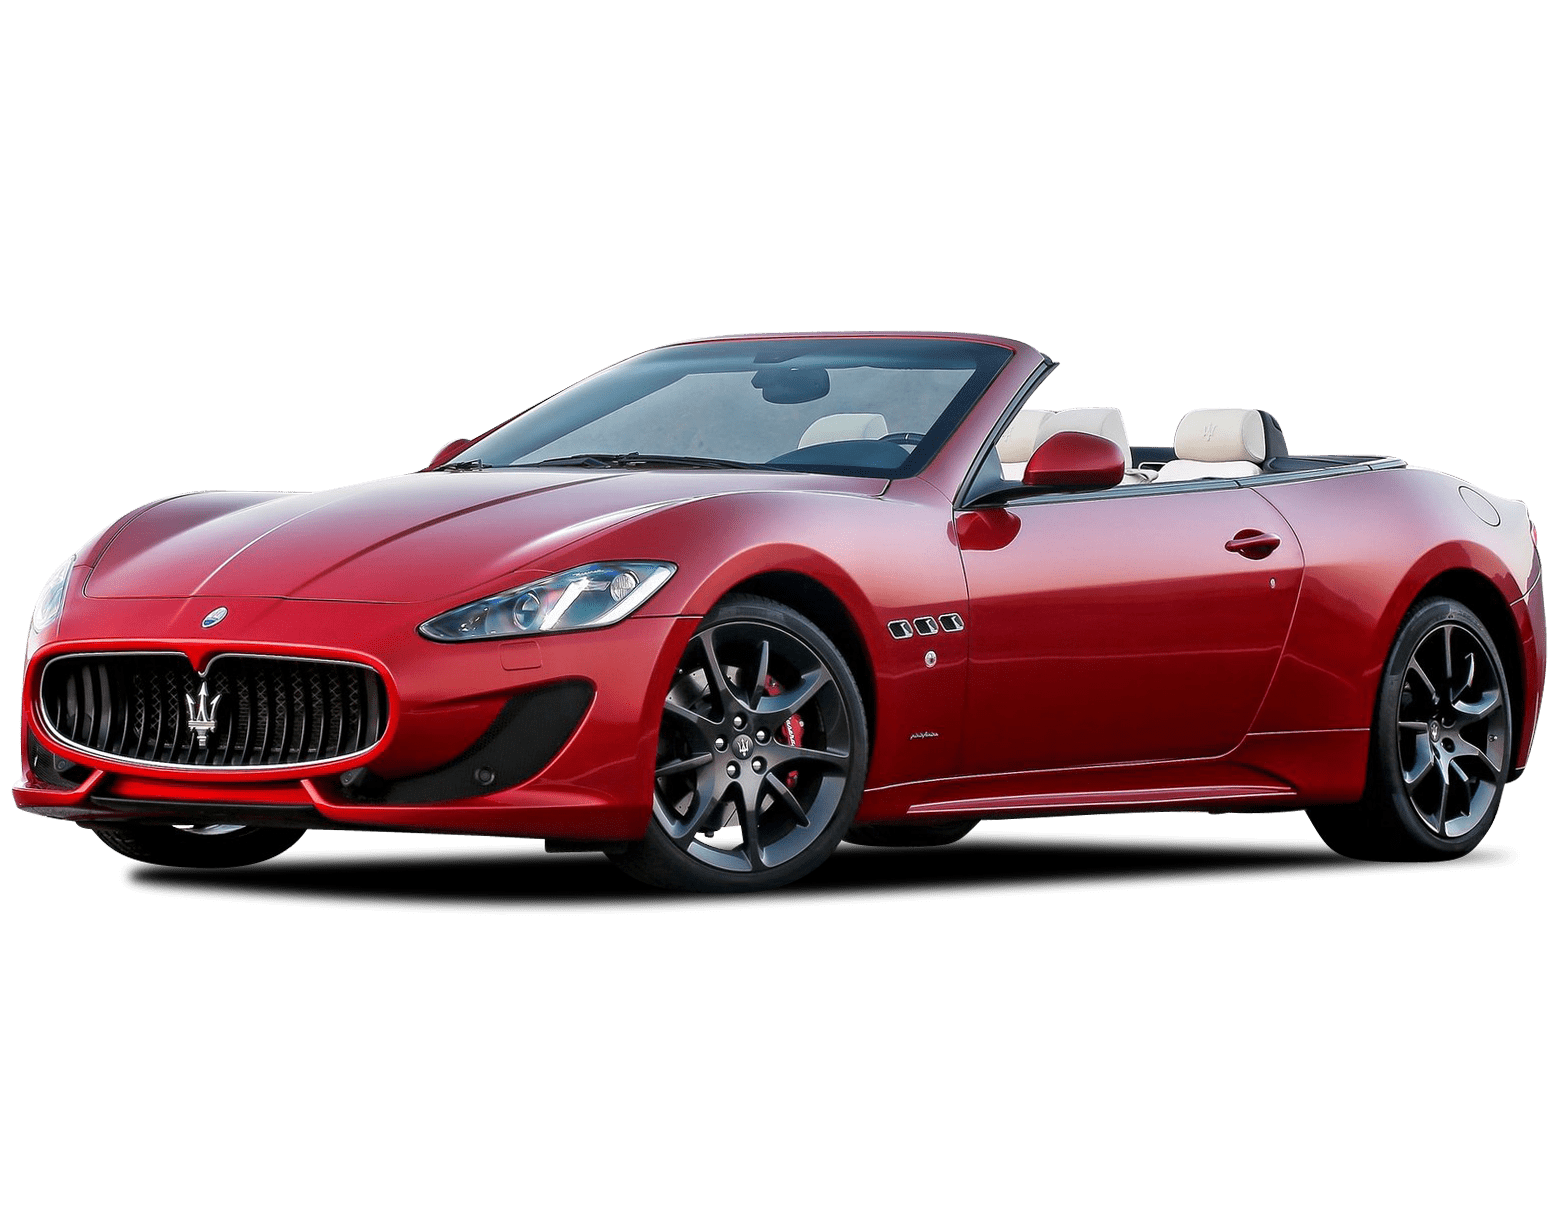 GranCabrio Review, For Sale, Models & News | CarsGuide